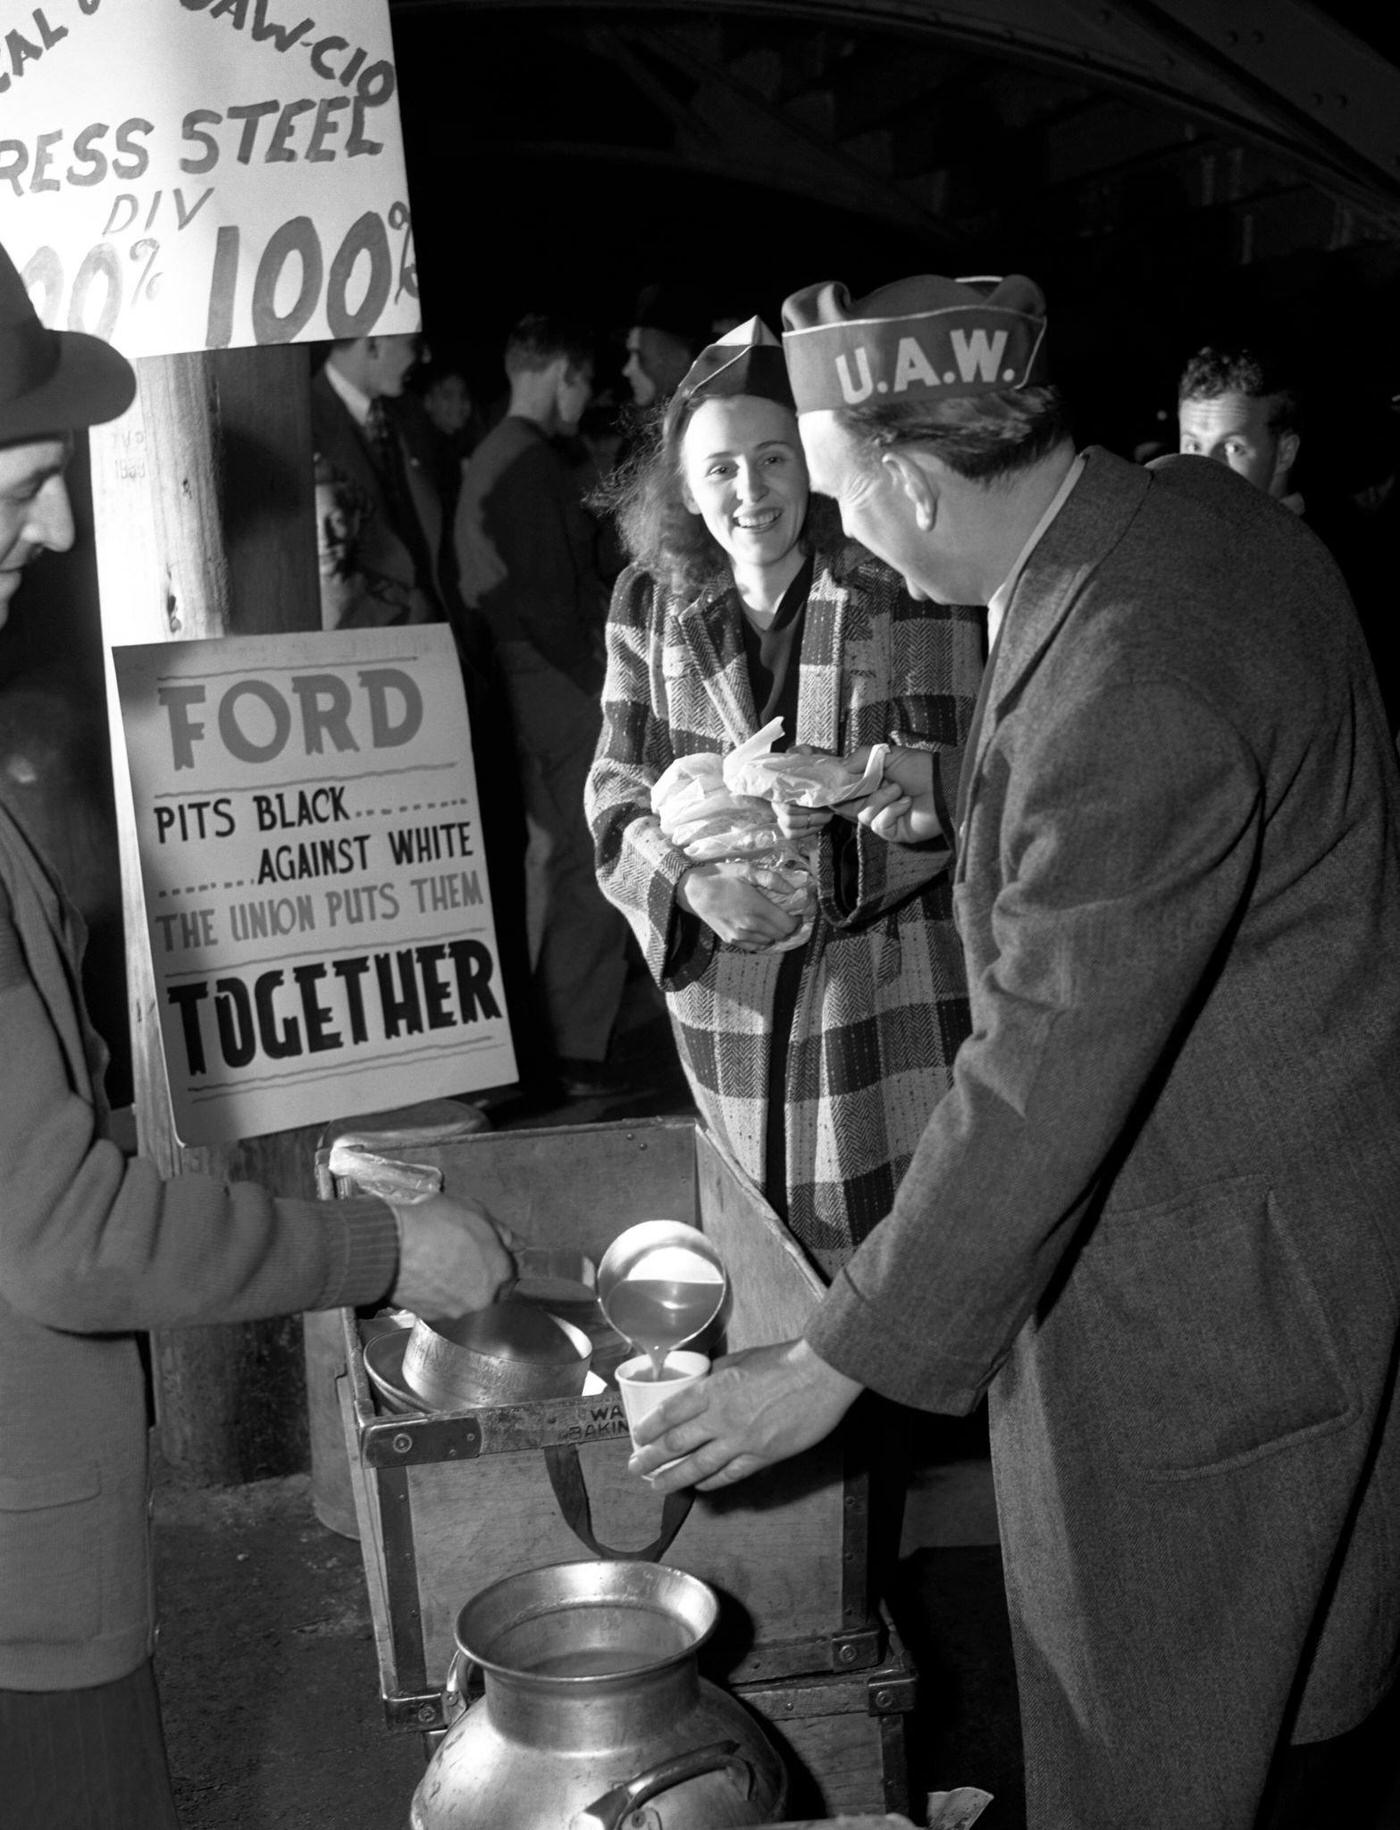 Two United Auto Workers (UAW) get coffee and food during the Detroit Ford Motor Company strike near the Ford River Rouge complex in Dearborn, Michigan, April 1941.